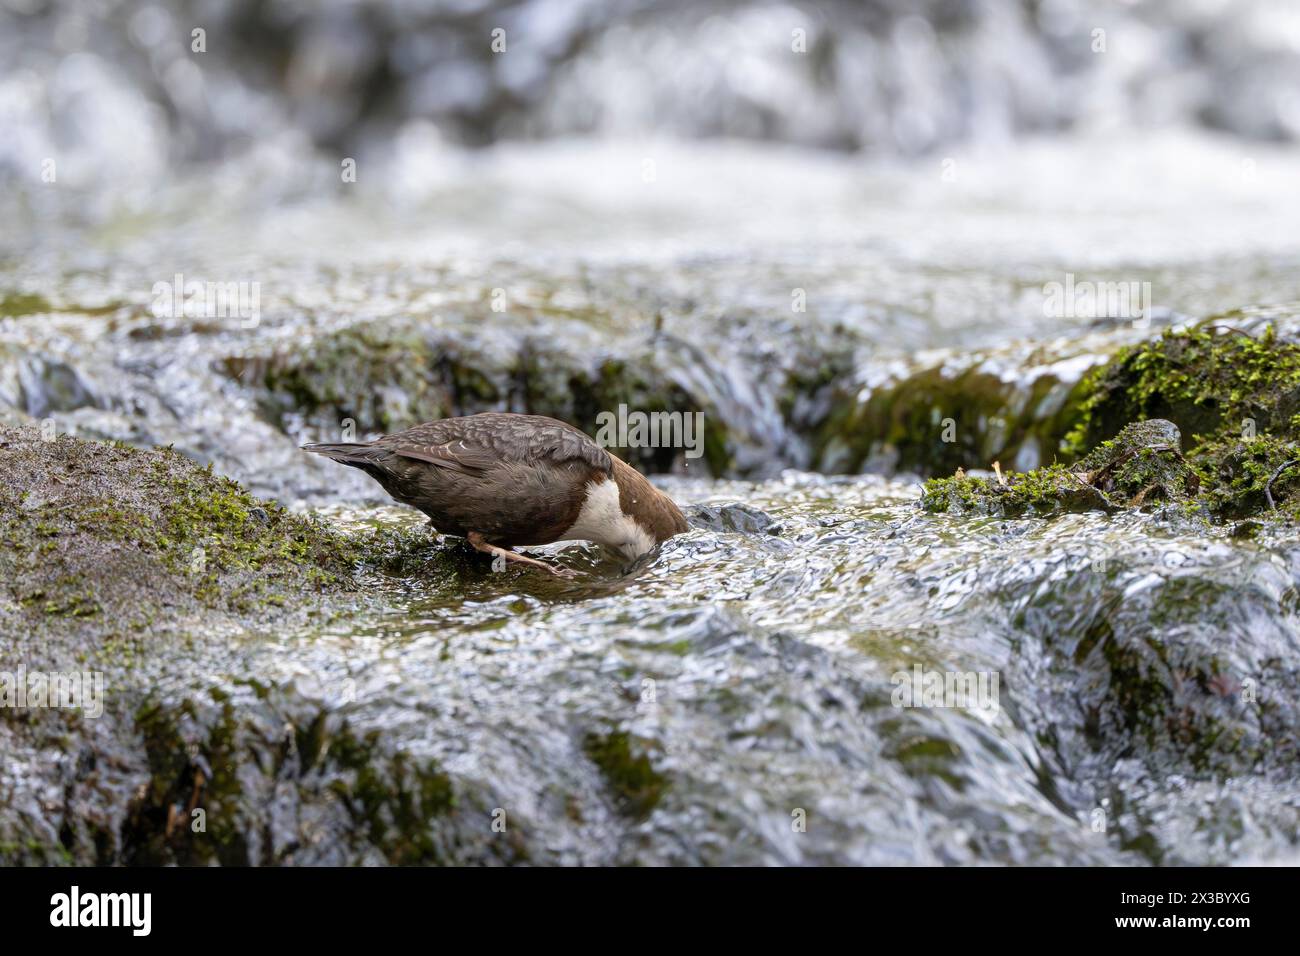 White-throated Dipper (Cinclus cinclus), foraging in a torrent by diving underwater, Rhineland-Palatinate, Germany Stock Photo